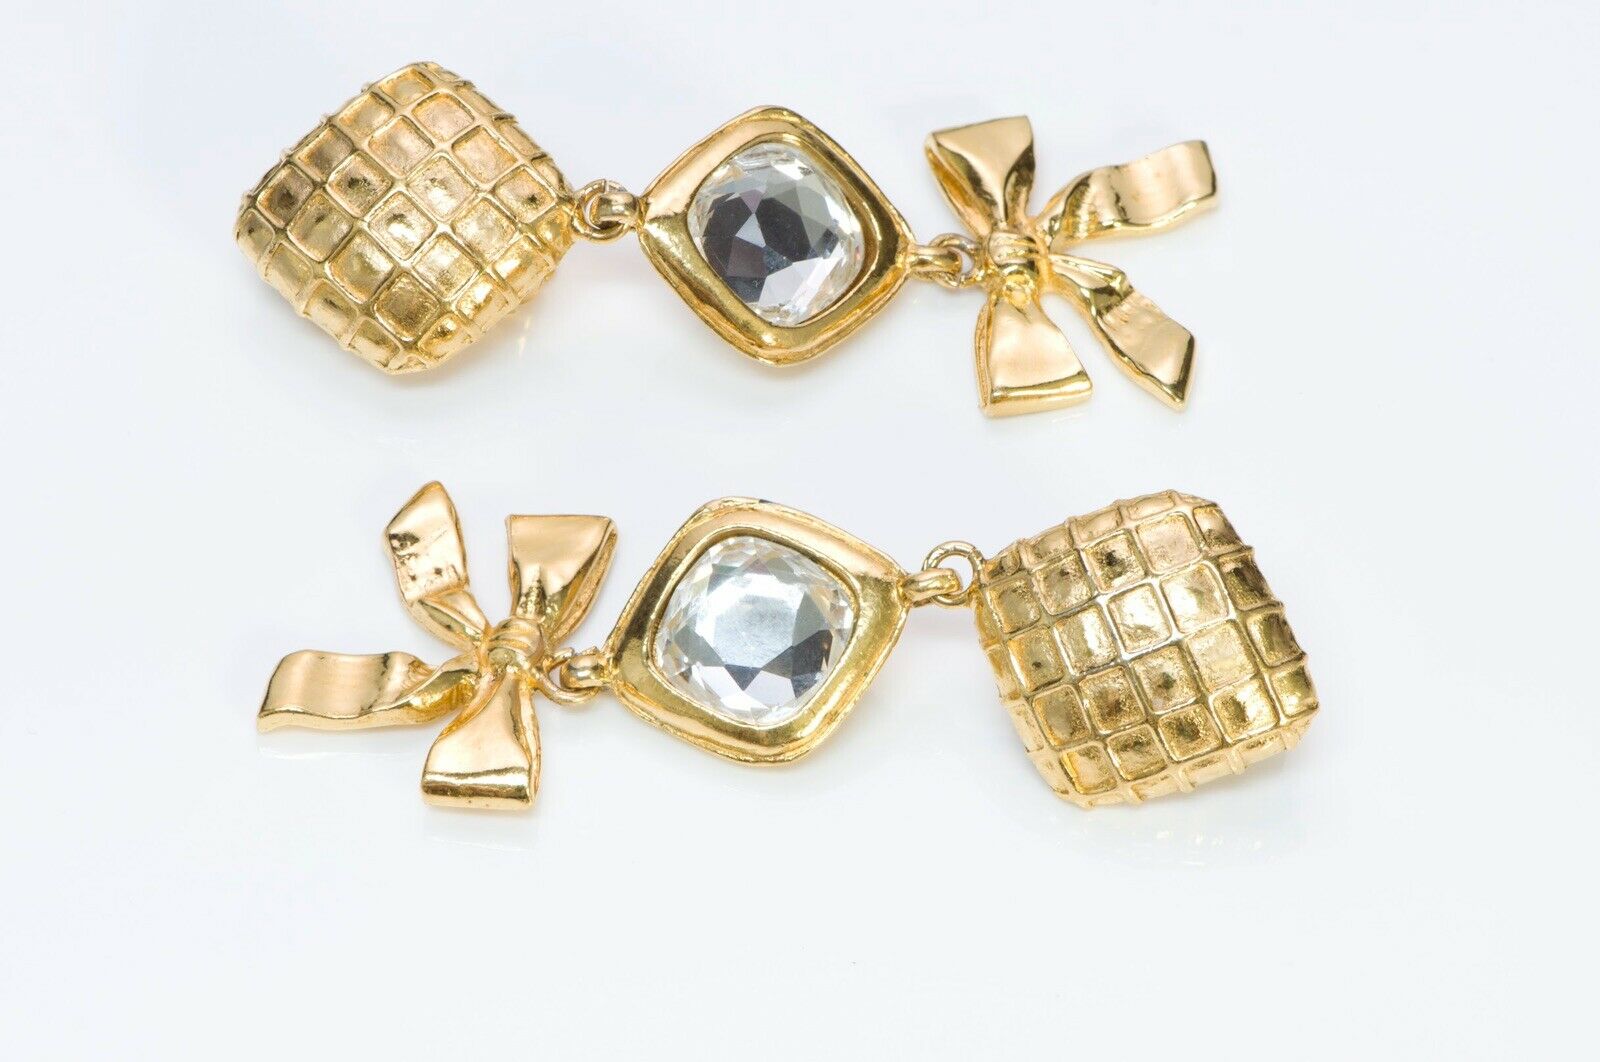 Vintage CHANEL CC 1970’s Long Quilted Crystal Bow Earrings